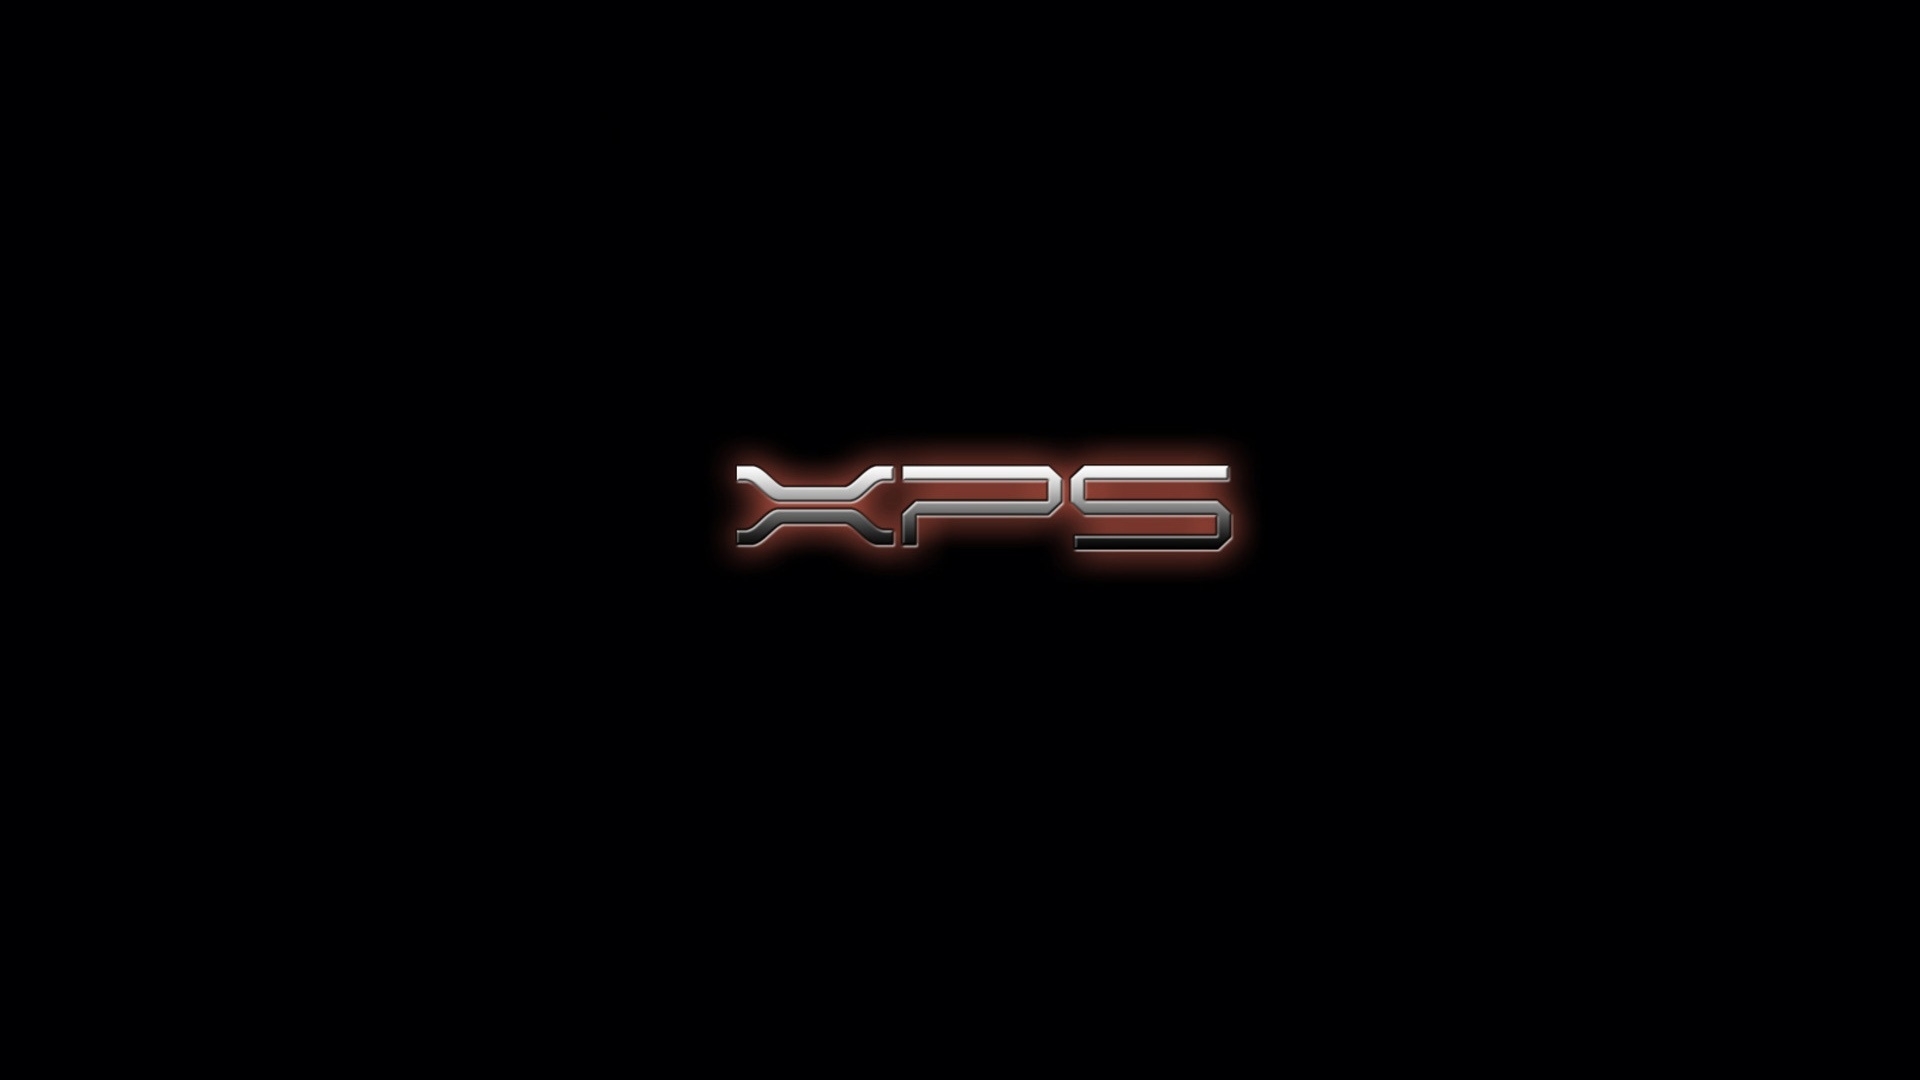 Dell Xps Red Shadow X HDtv 1080p Wallpaper